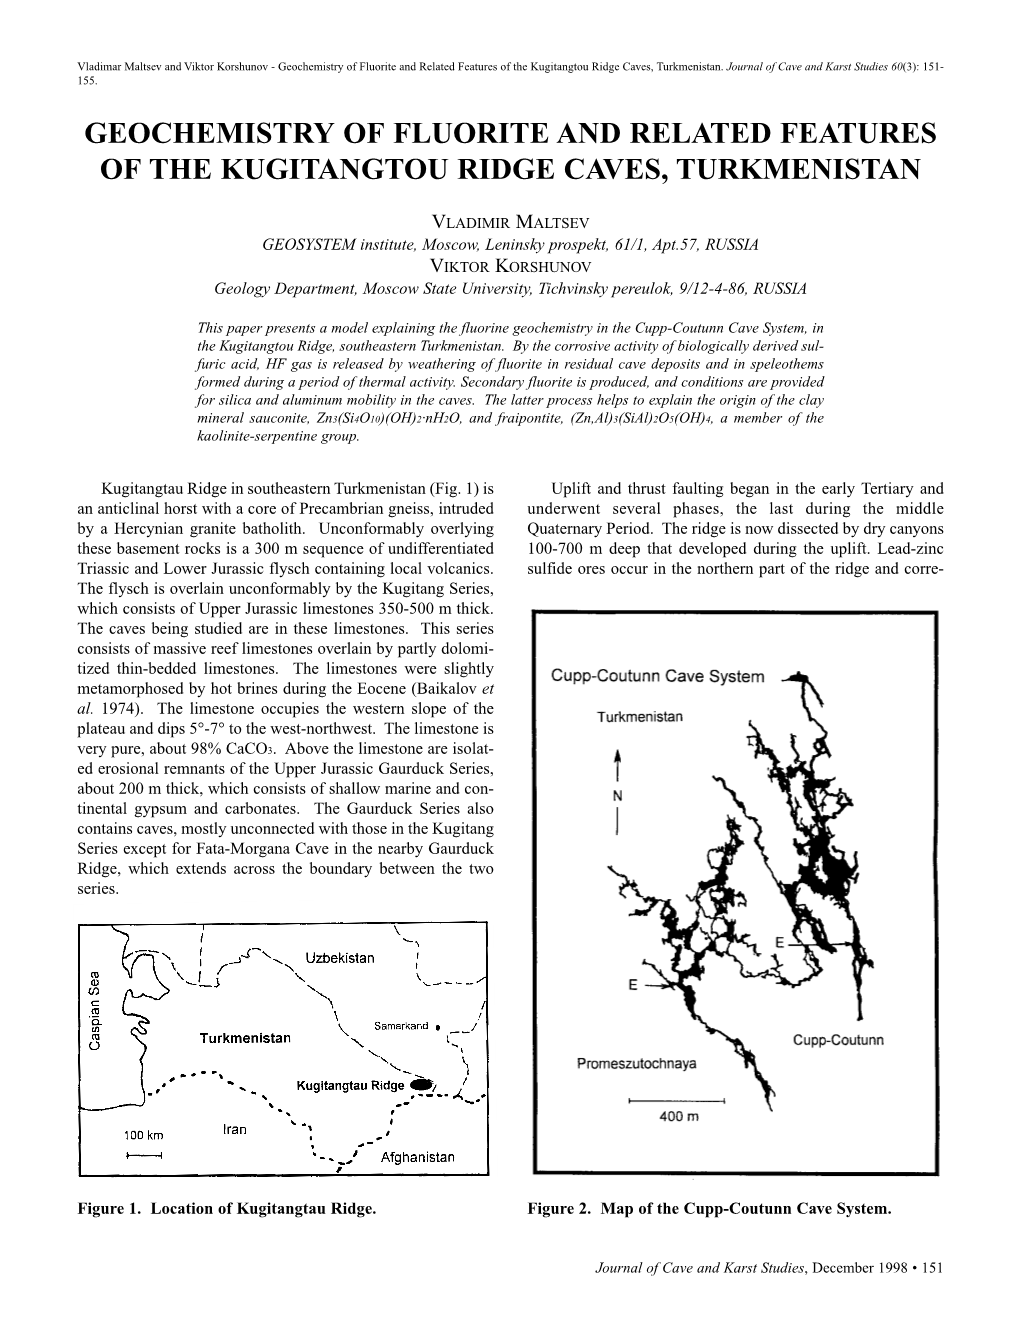 Geochemistry of Fluorite and Related Features of the Kugitangtou Ridge Caves, Turkmenistan